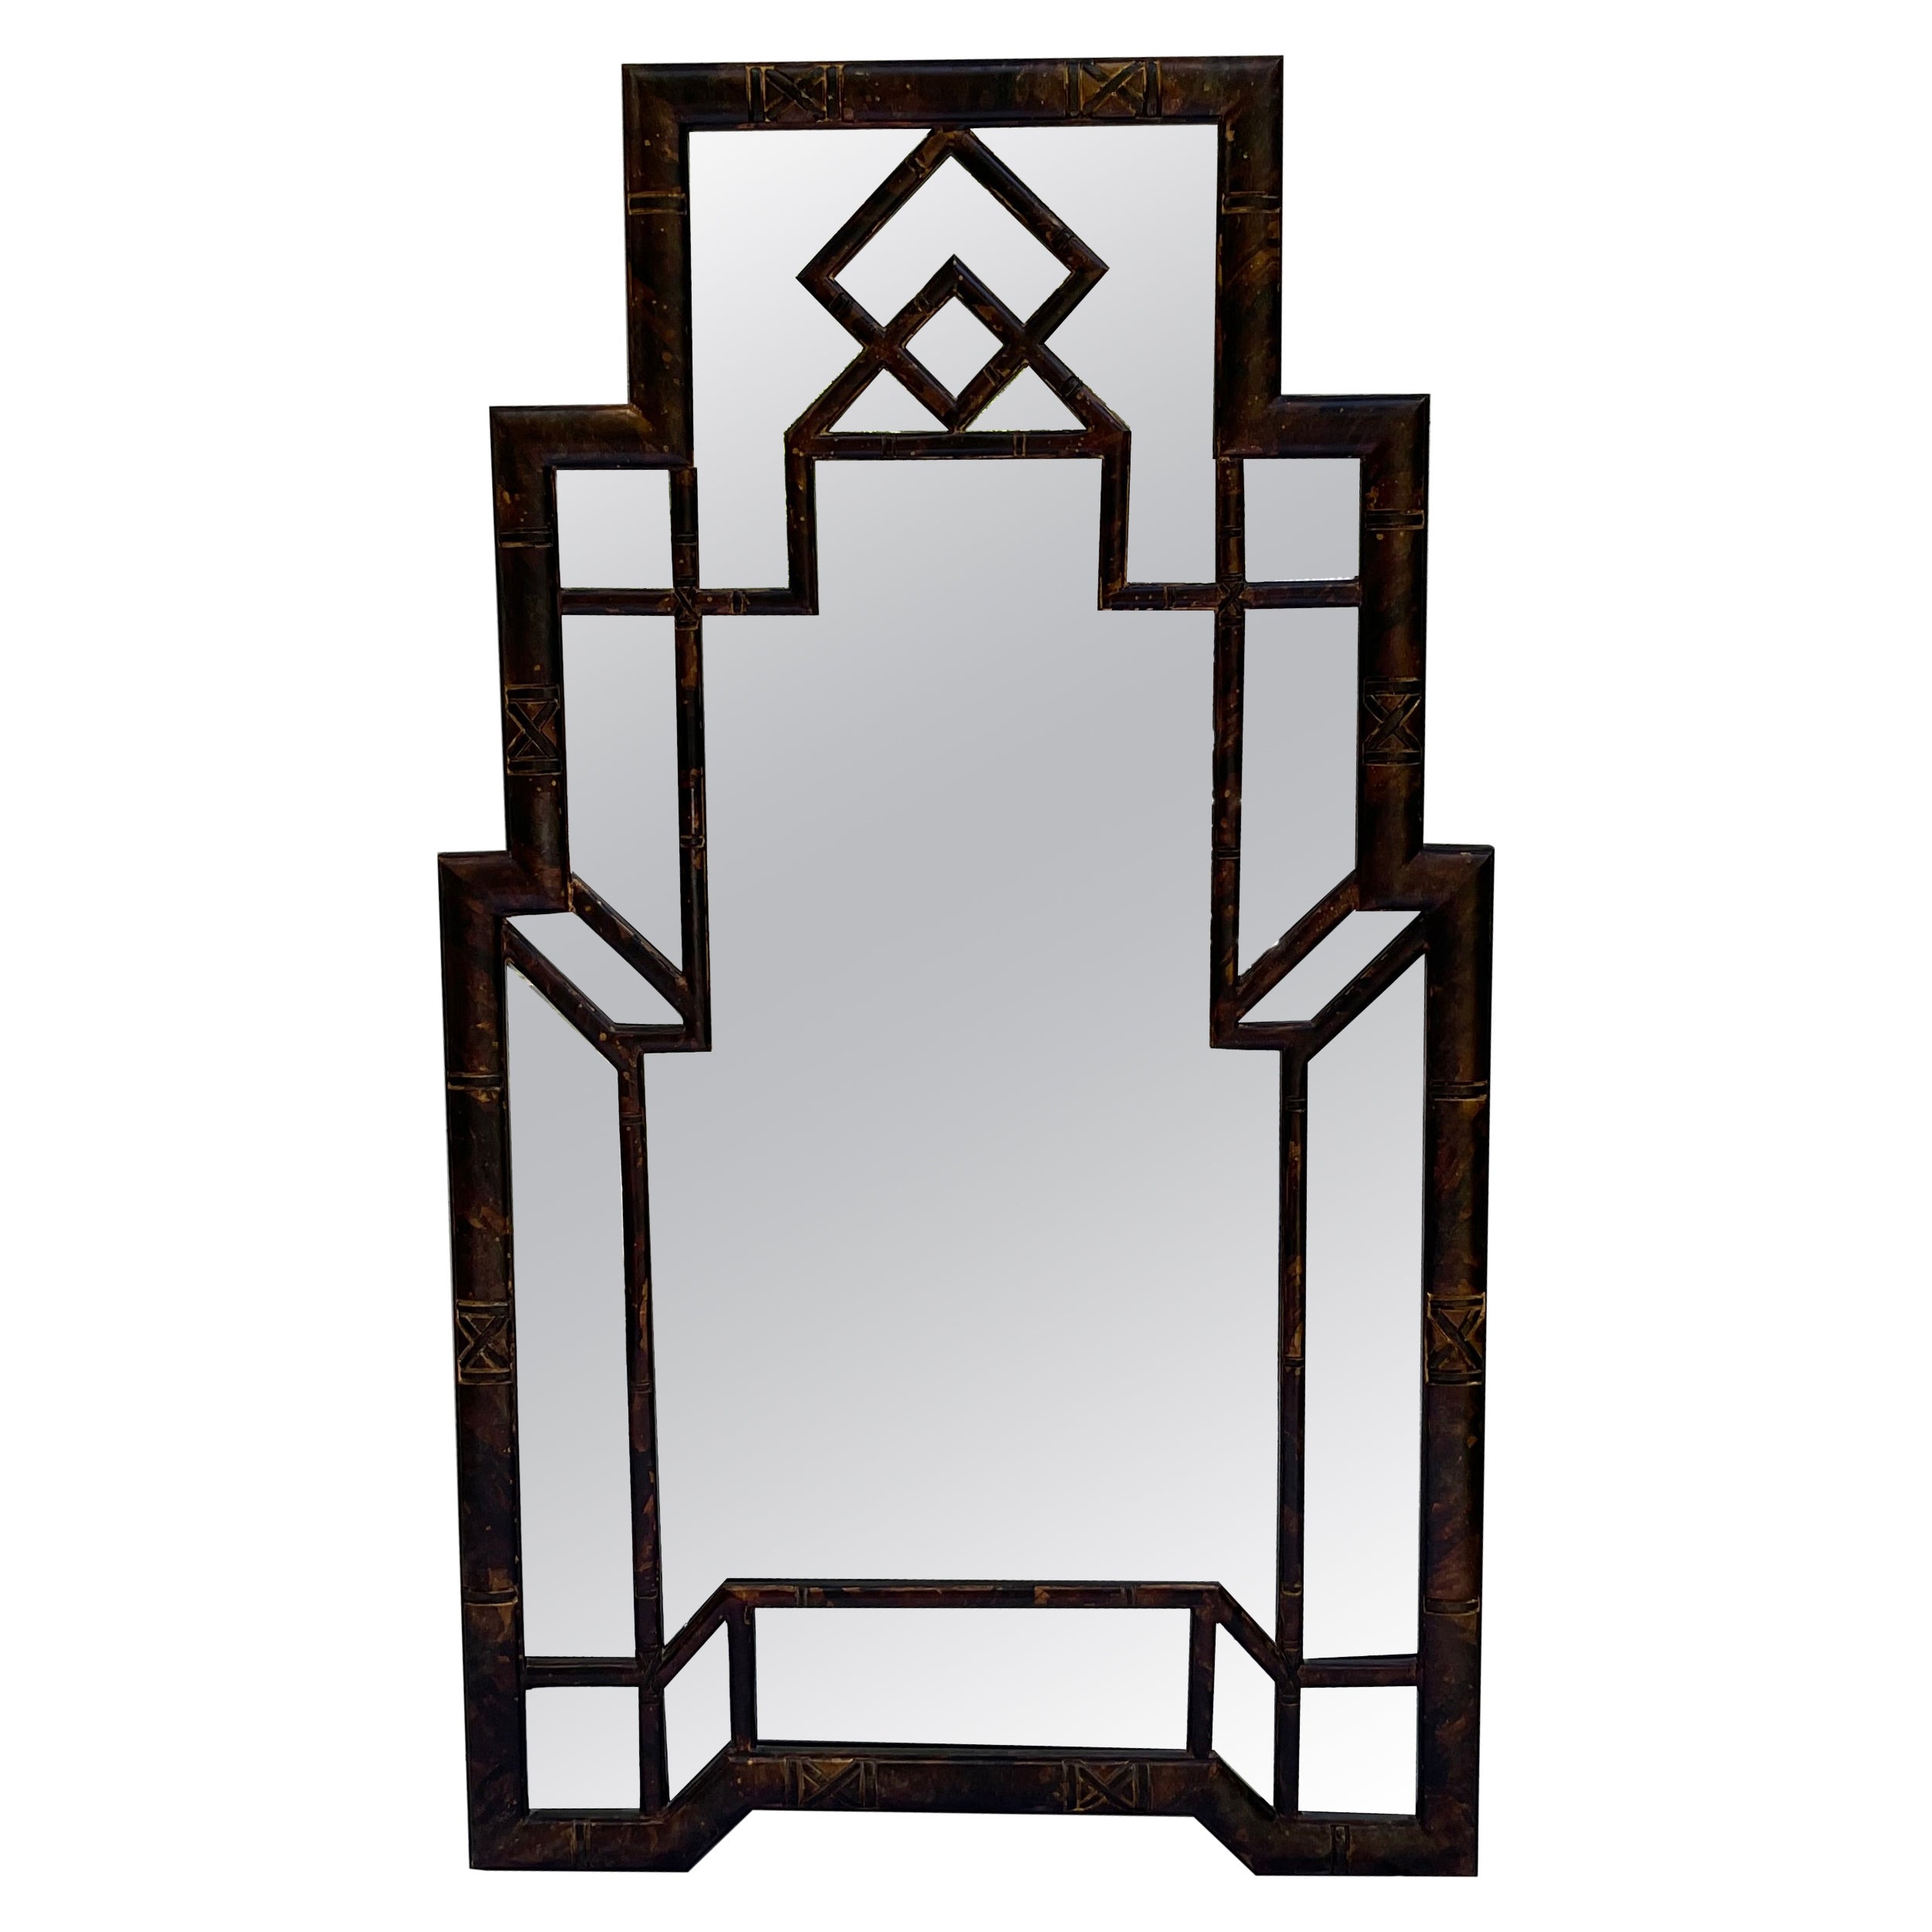 Faux Tortoise Art Deco Style Mirror by Carol Canner